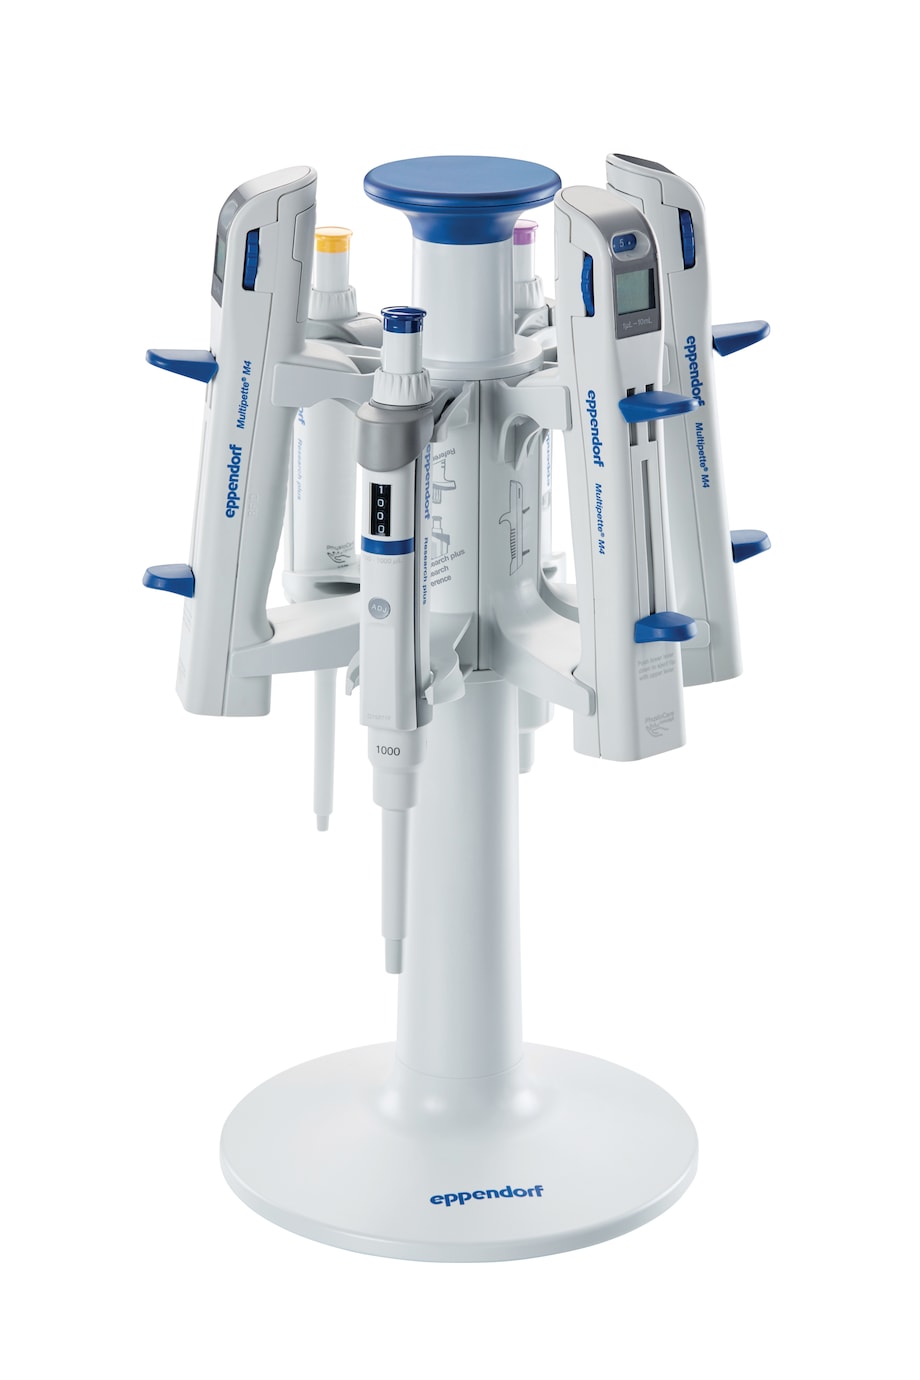 Store your Multipette® M4 multi-dispenser securely on a Pipette Carousel 2 or Charger Carousel 2 by Eppendorf